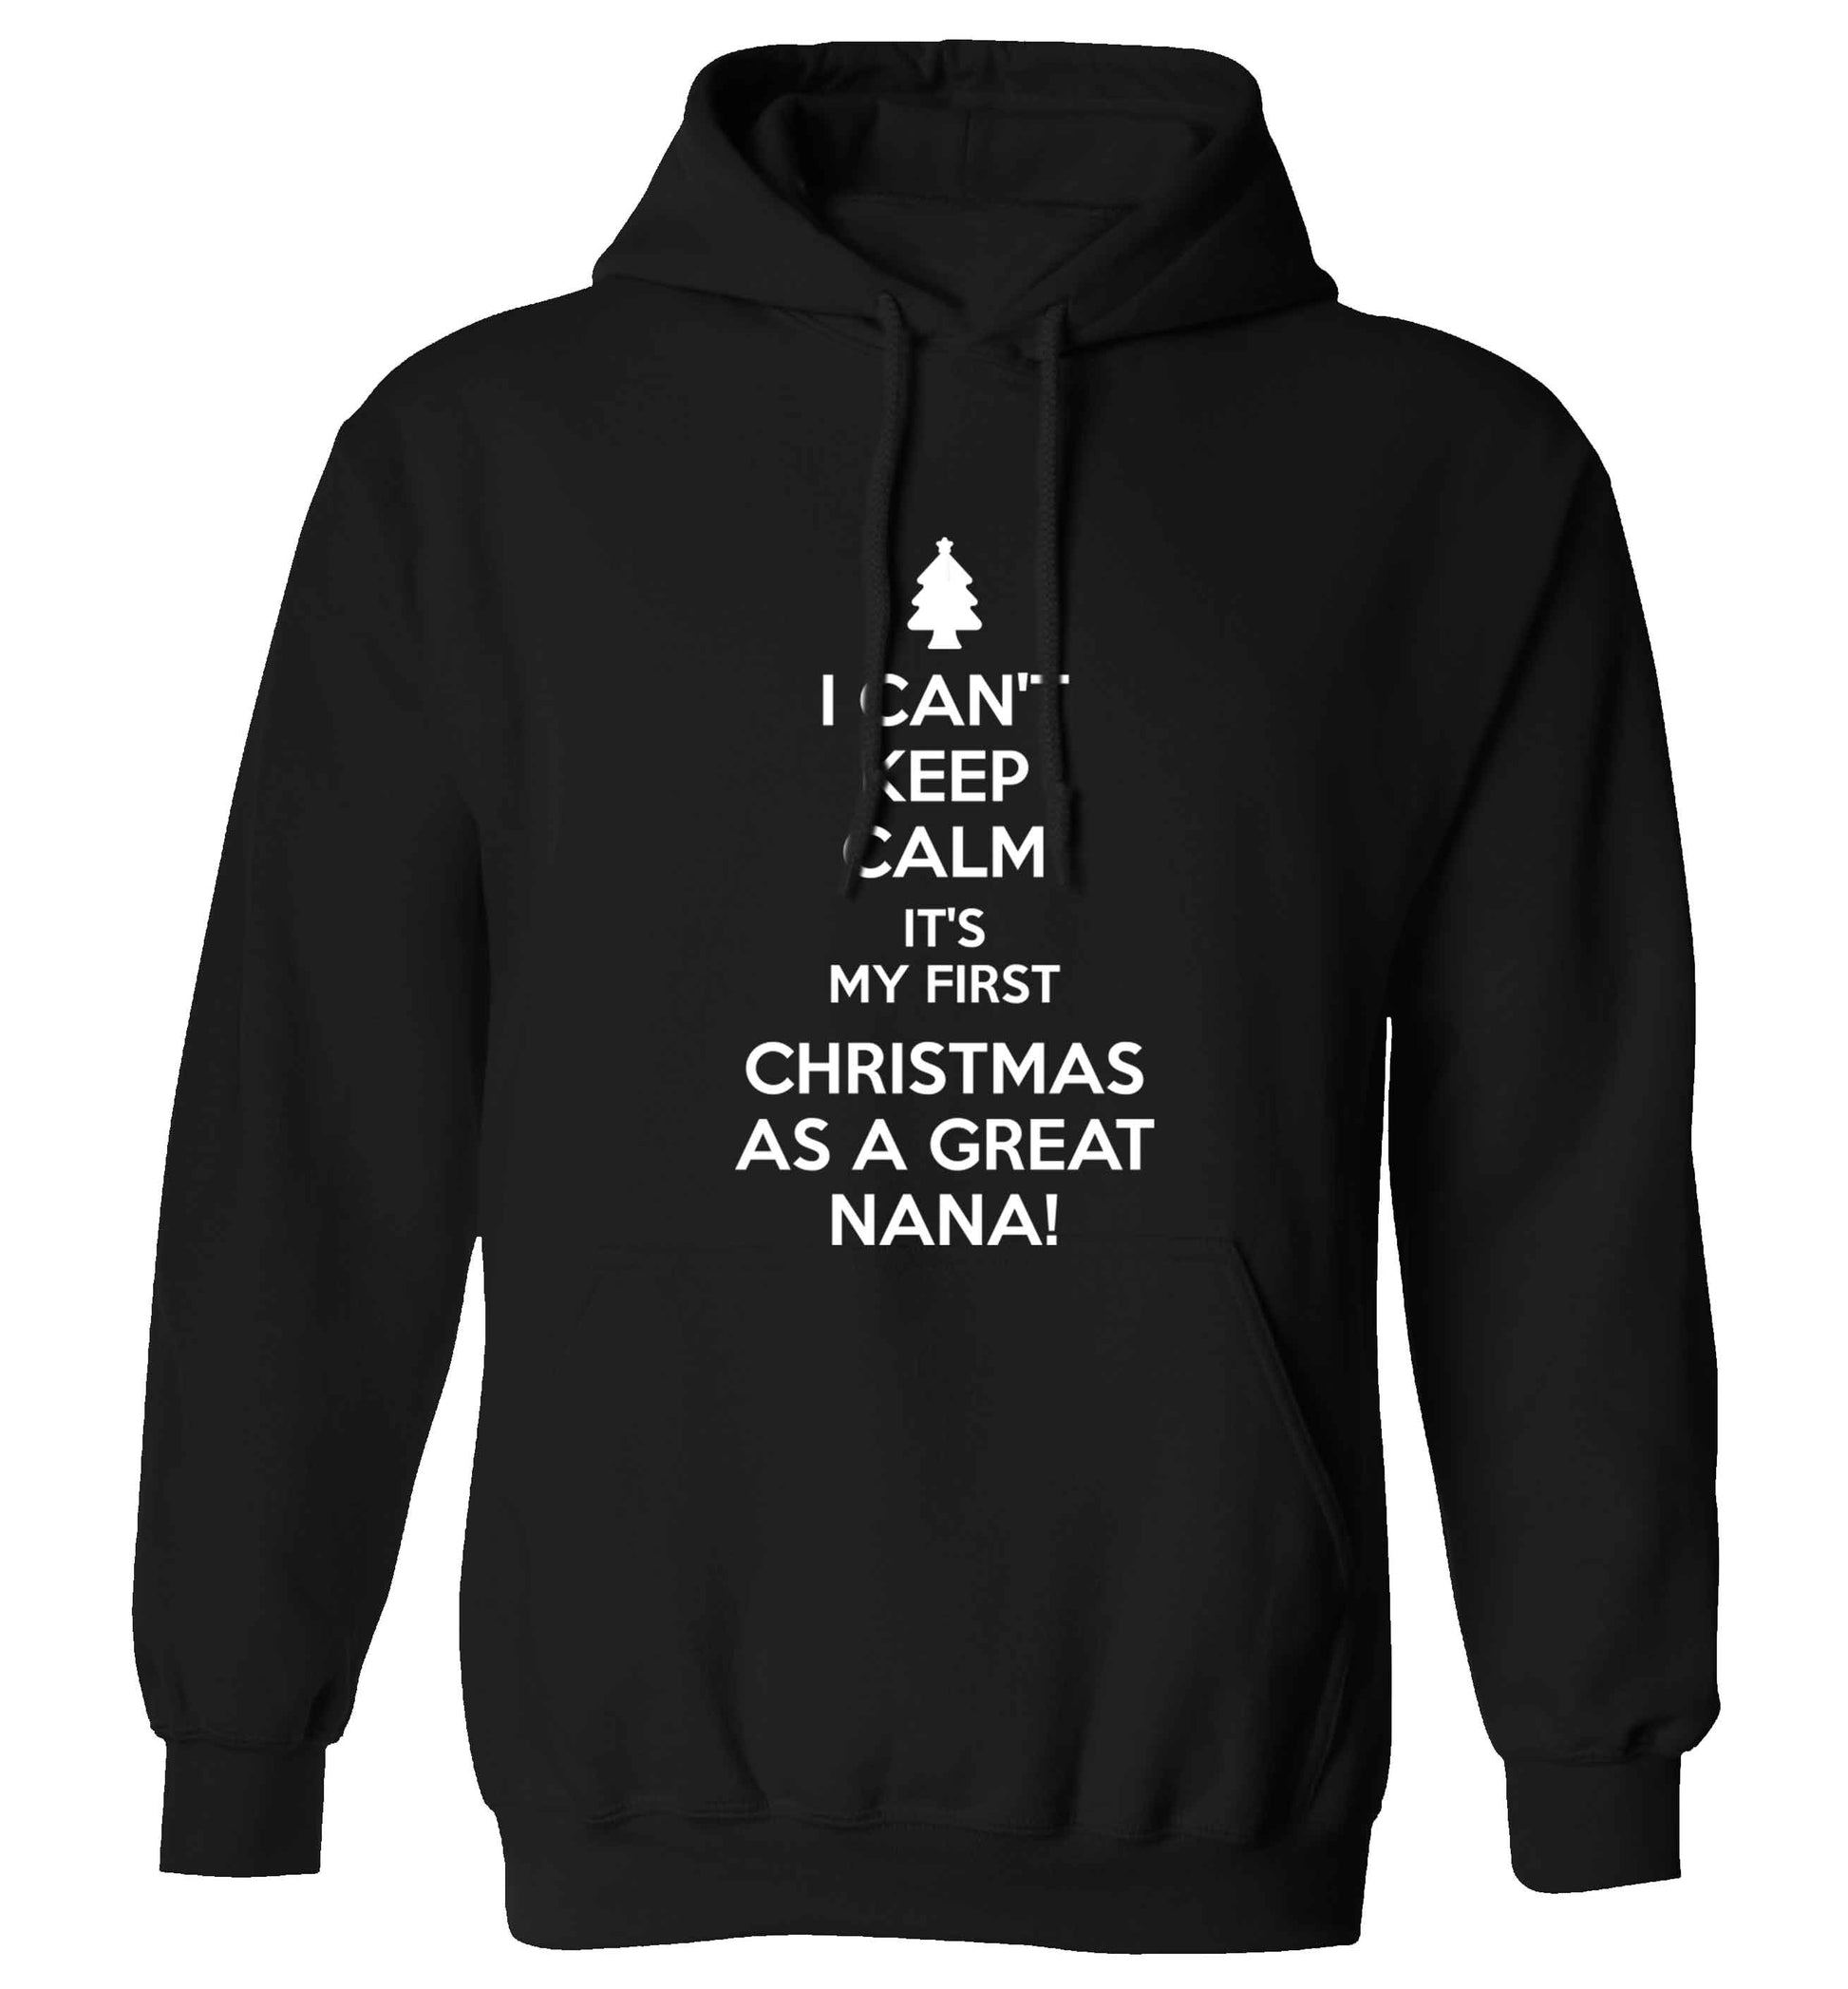 I can't keep calm it's my first Christmas as a great nana! adults unisex black hoodie 2XL